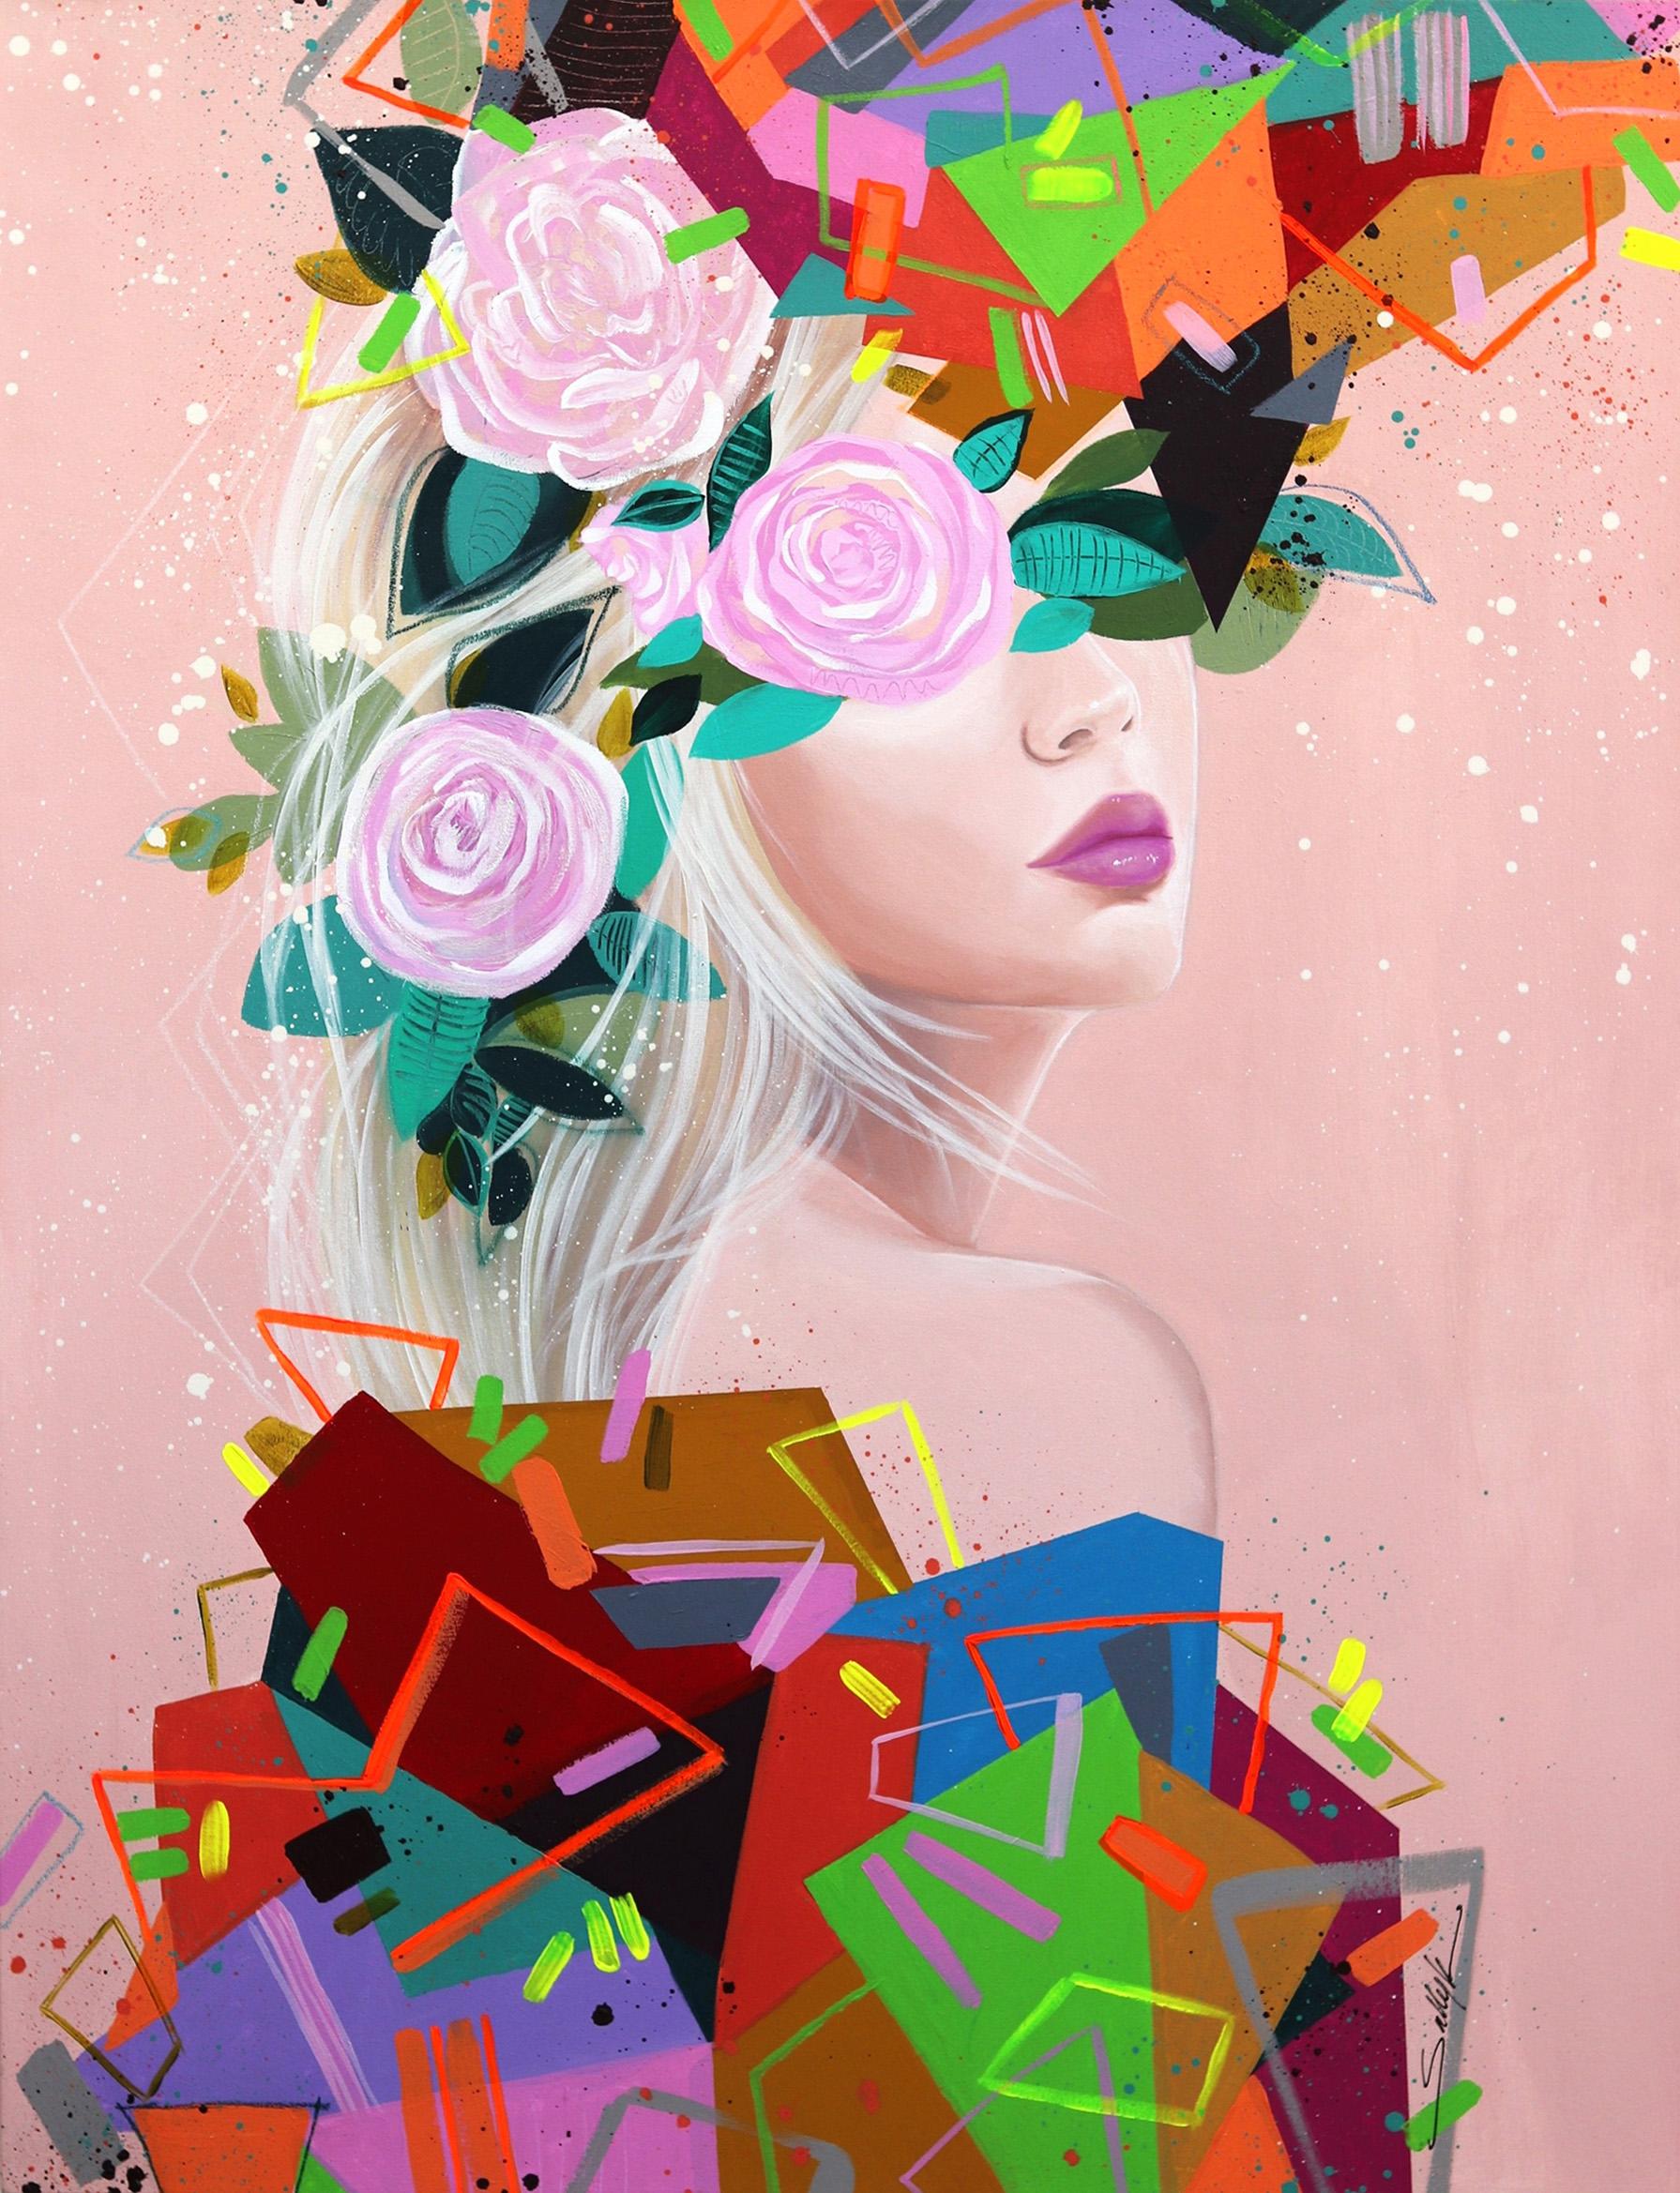 Sally K Figurative Painting - Geometries II - Large Original Colorful Pink Figurative Abstract Floral Painting